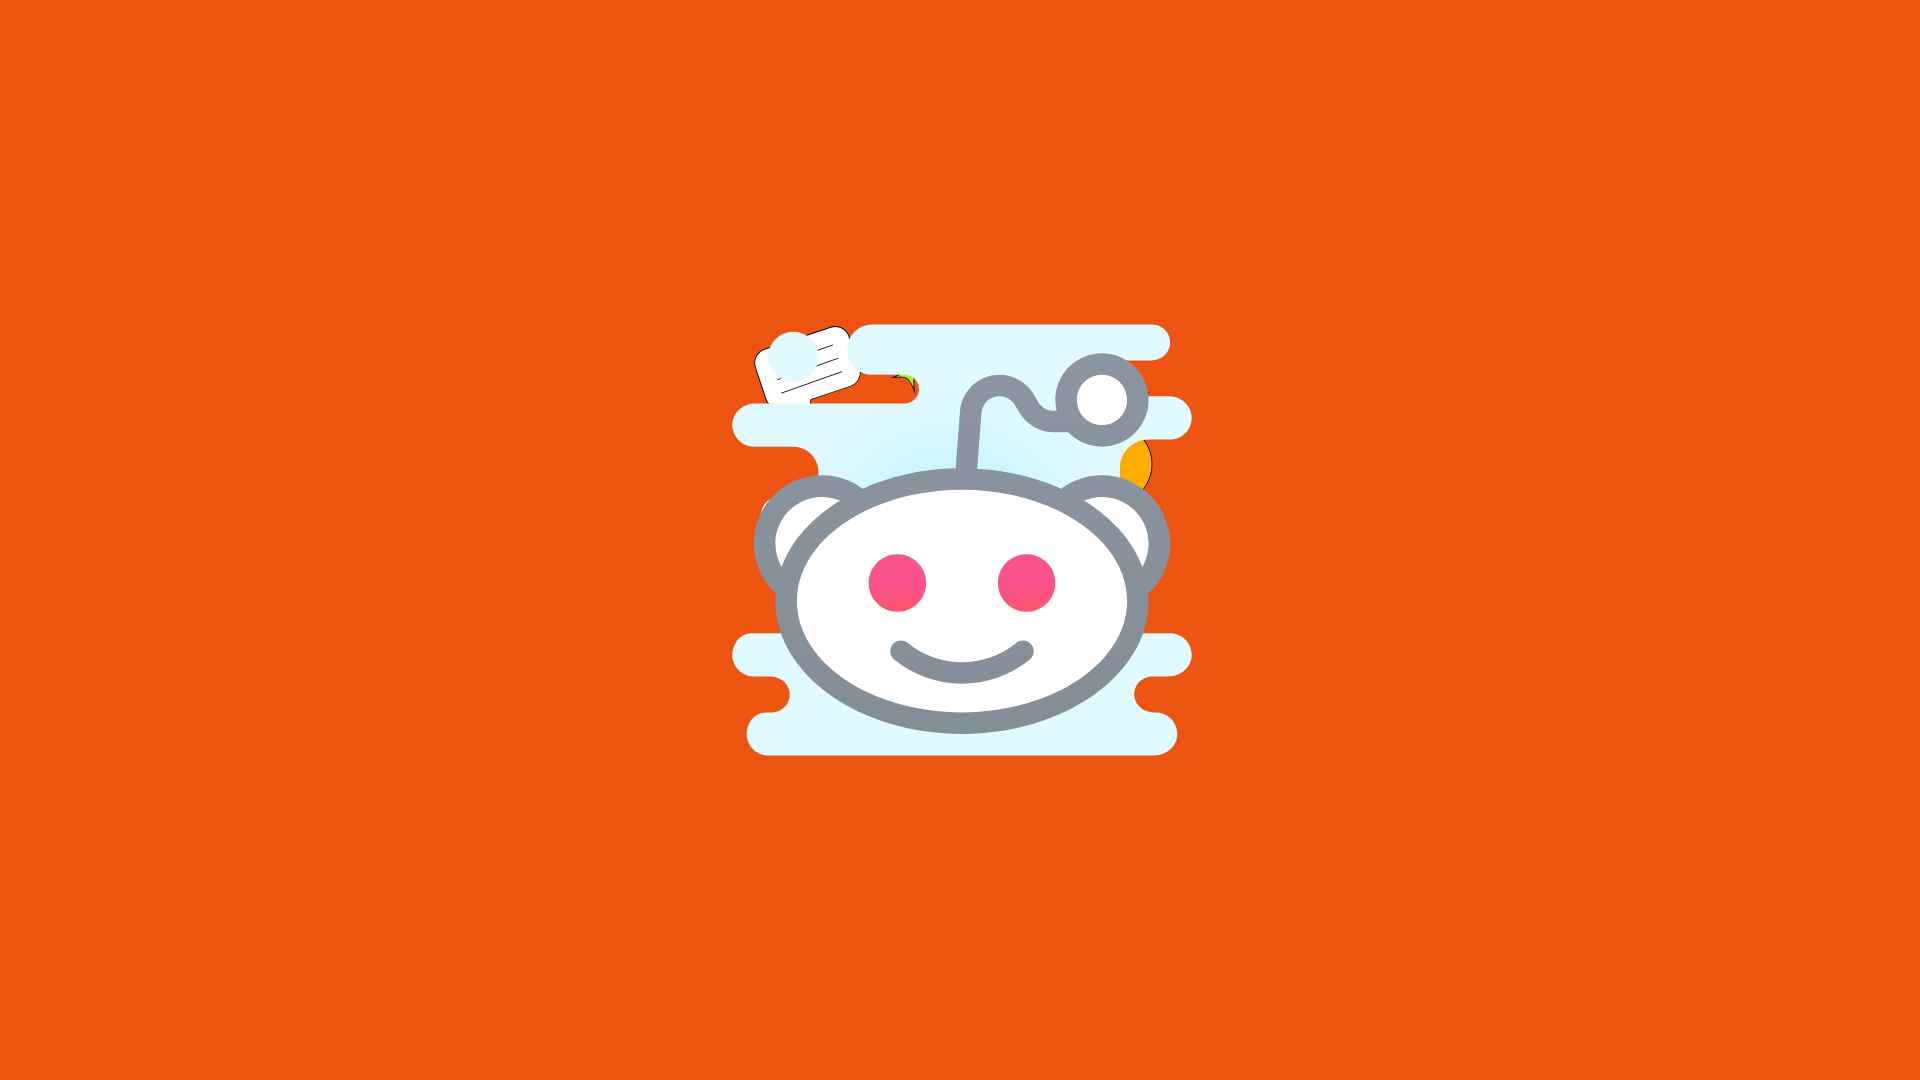 Are there any limitations on the length or format of posts or comments on Reddit?